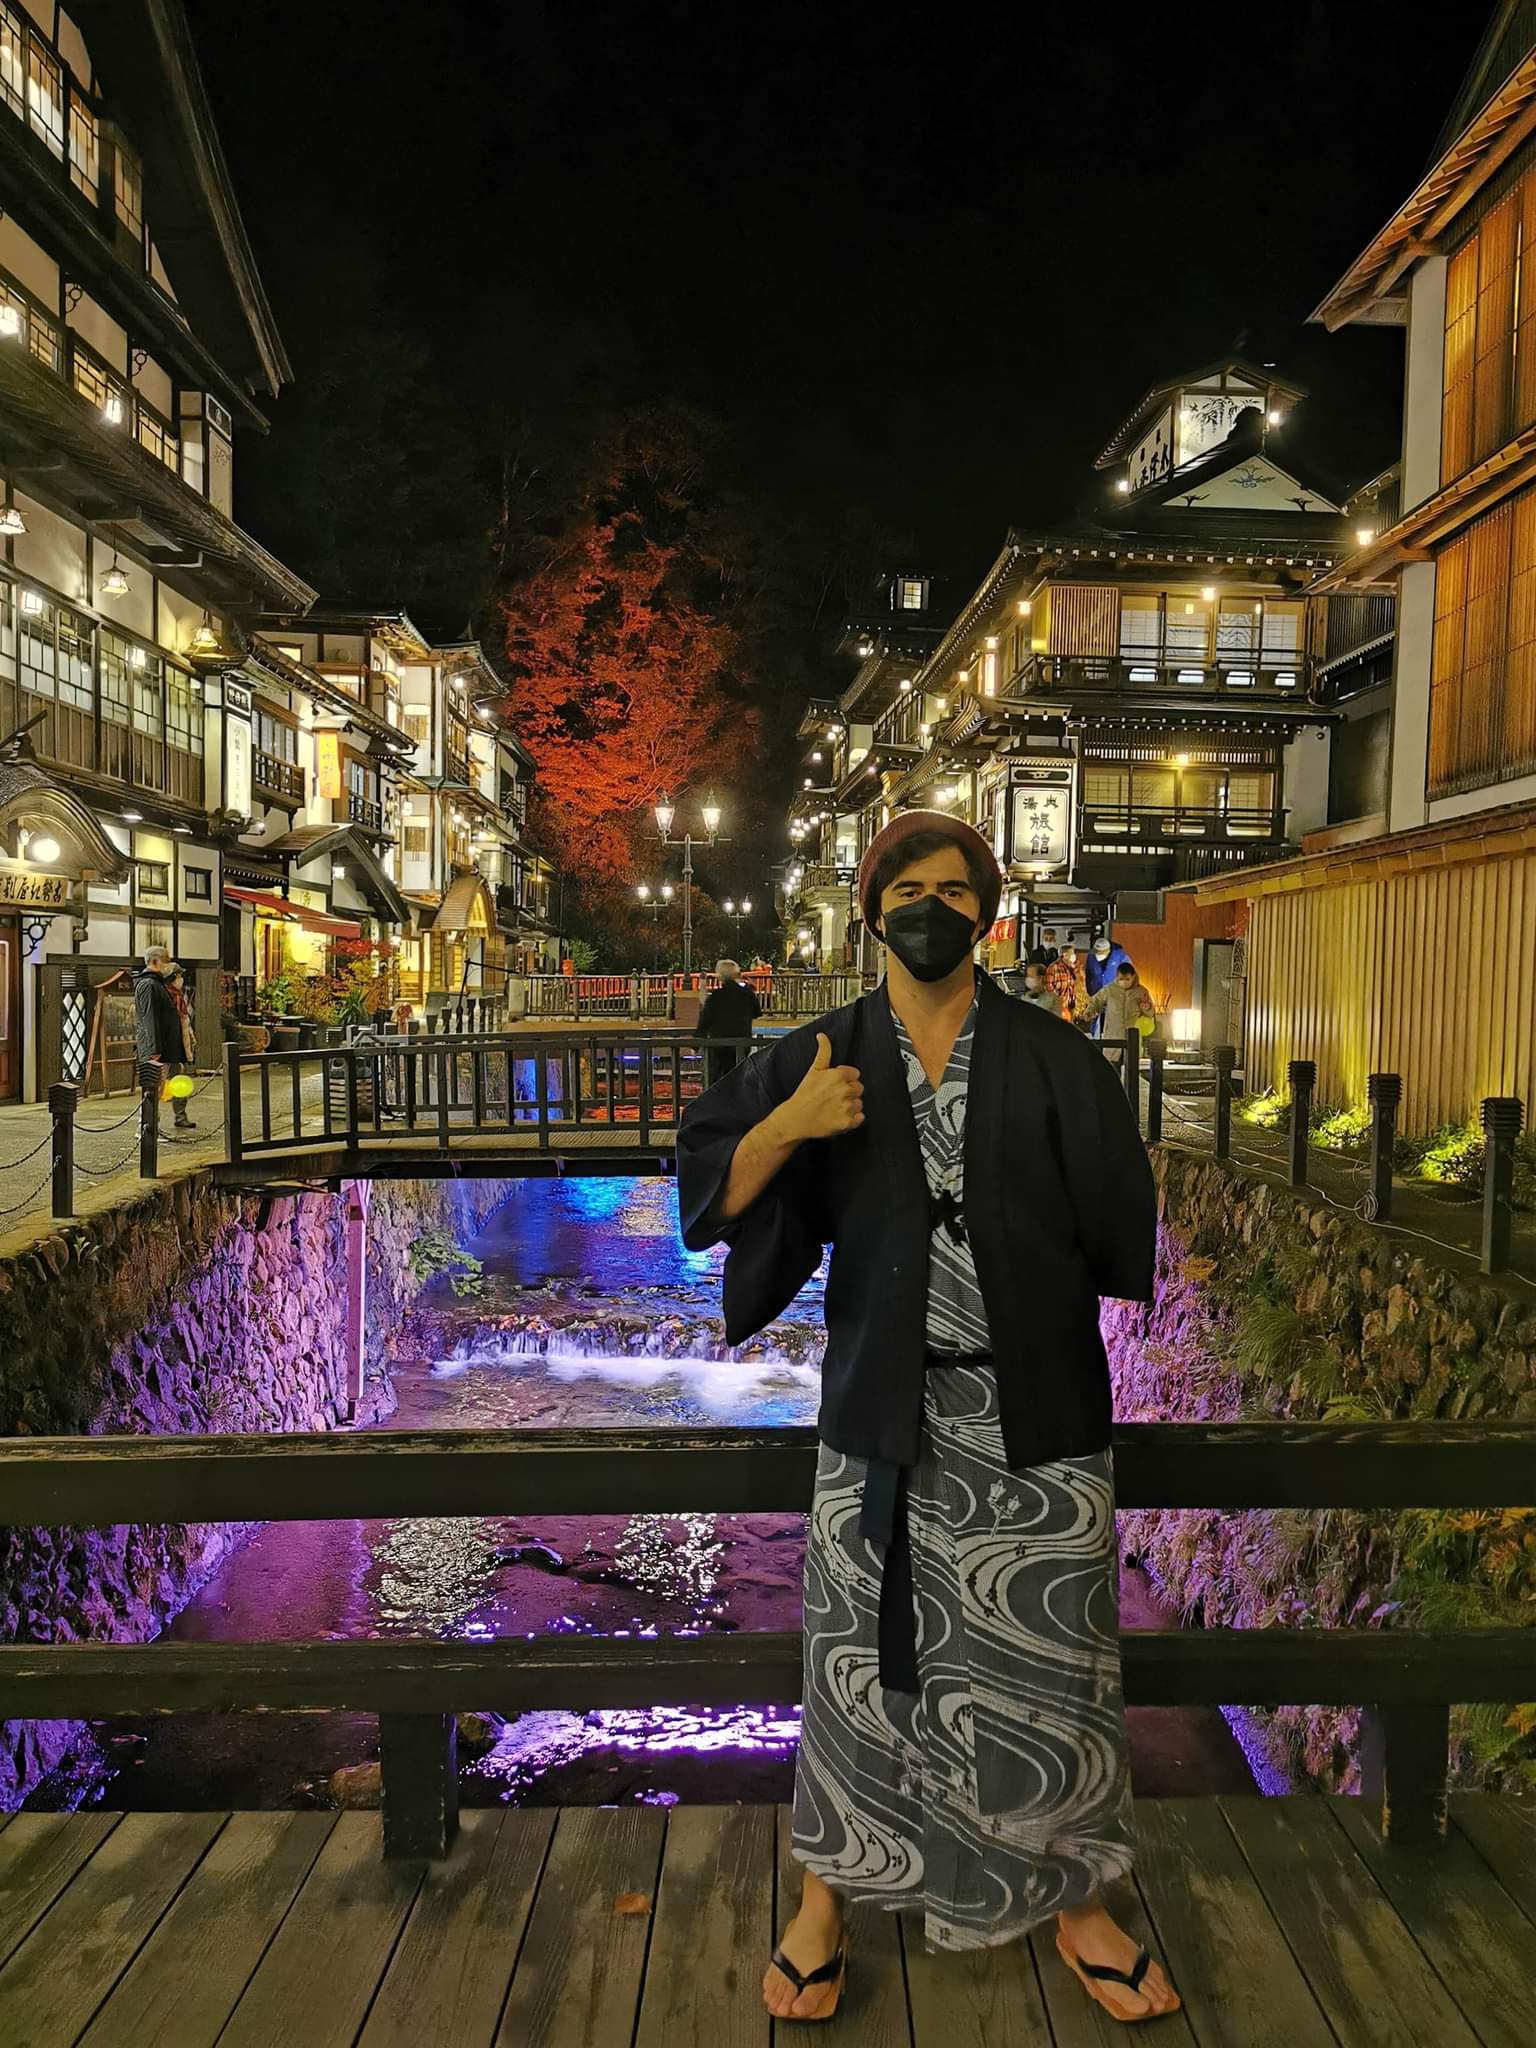 Ginzan is a must-see for onsen lovers